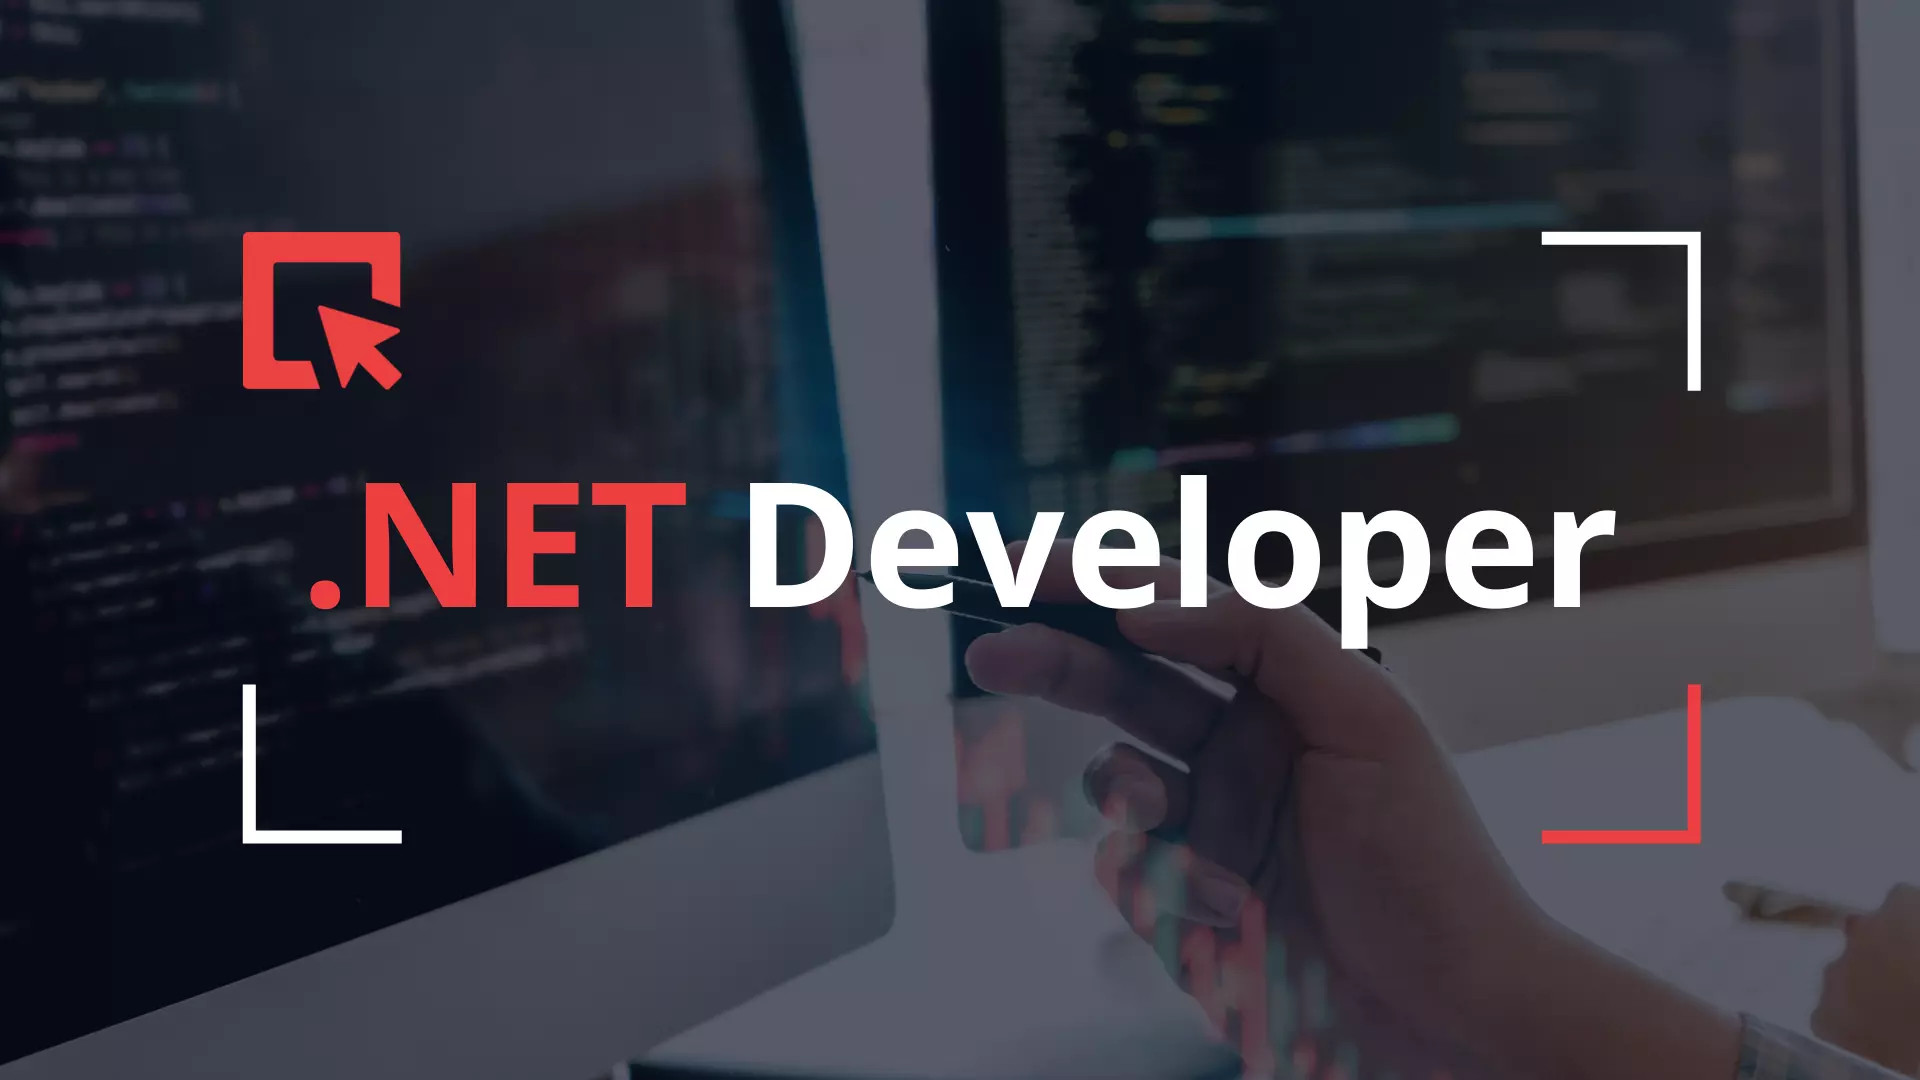 Roweb Development on X: #RowebTeam We are looking for a Backend .Net  Developer to join our team remotely or from one of our offices (Bucharest,  Pitesti, Craiova). If this sounds interesting, please